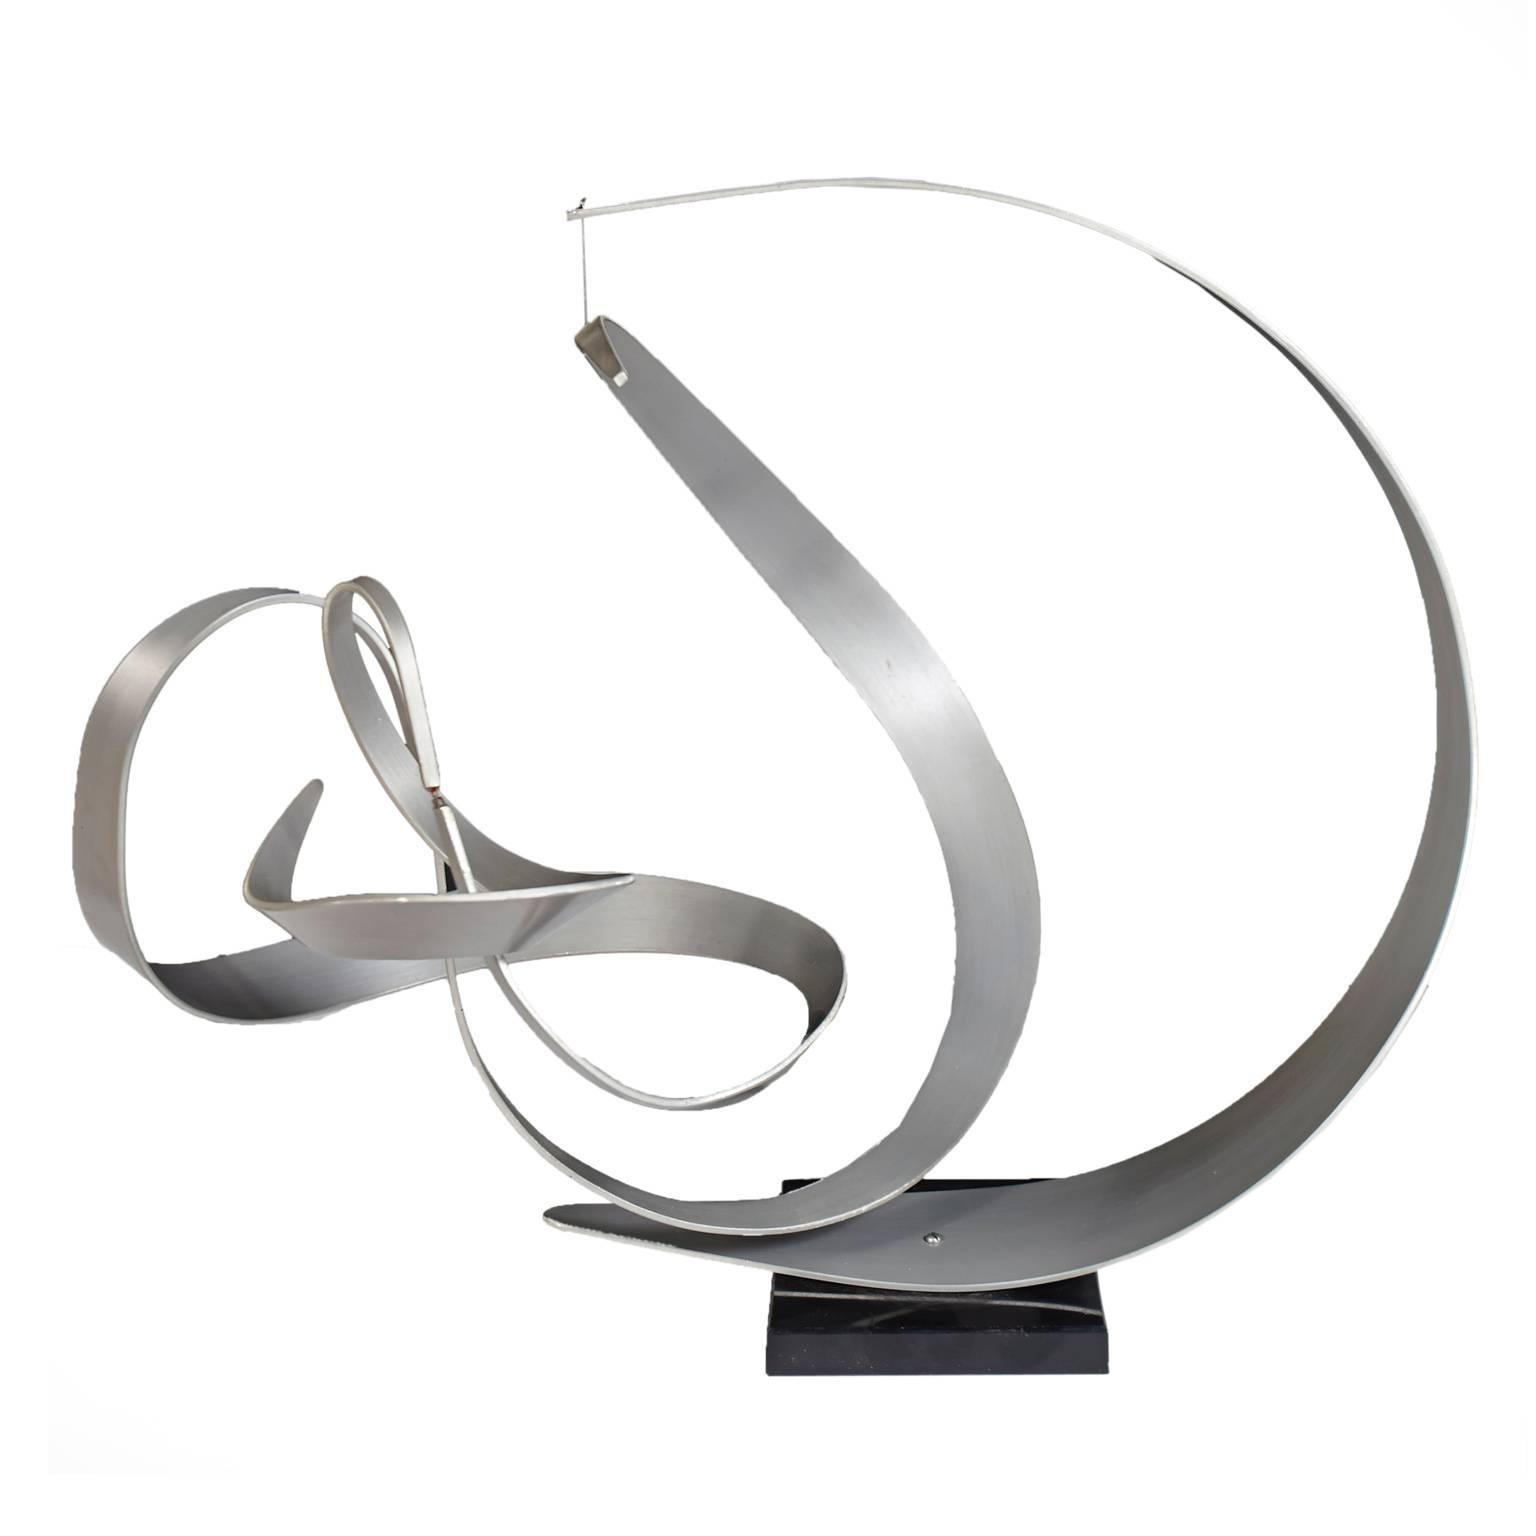 An amazing work of art, elegant aluminum sculpture that moves at the slightest touch and remains perfectly balanced. Base has label marked, 